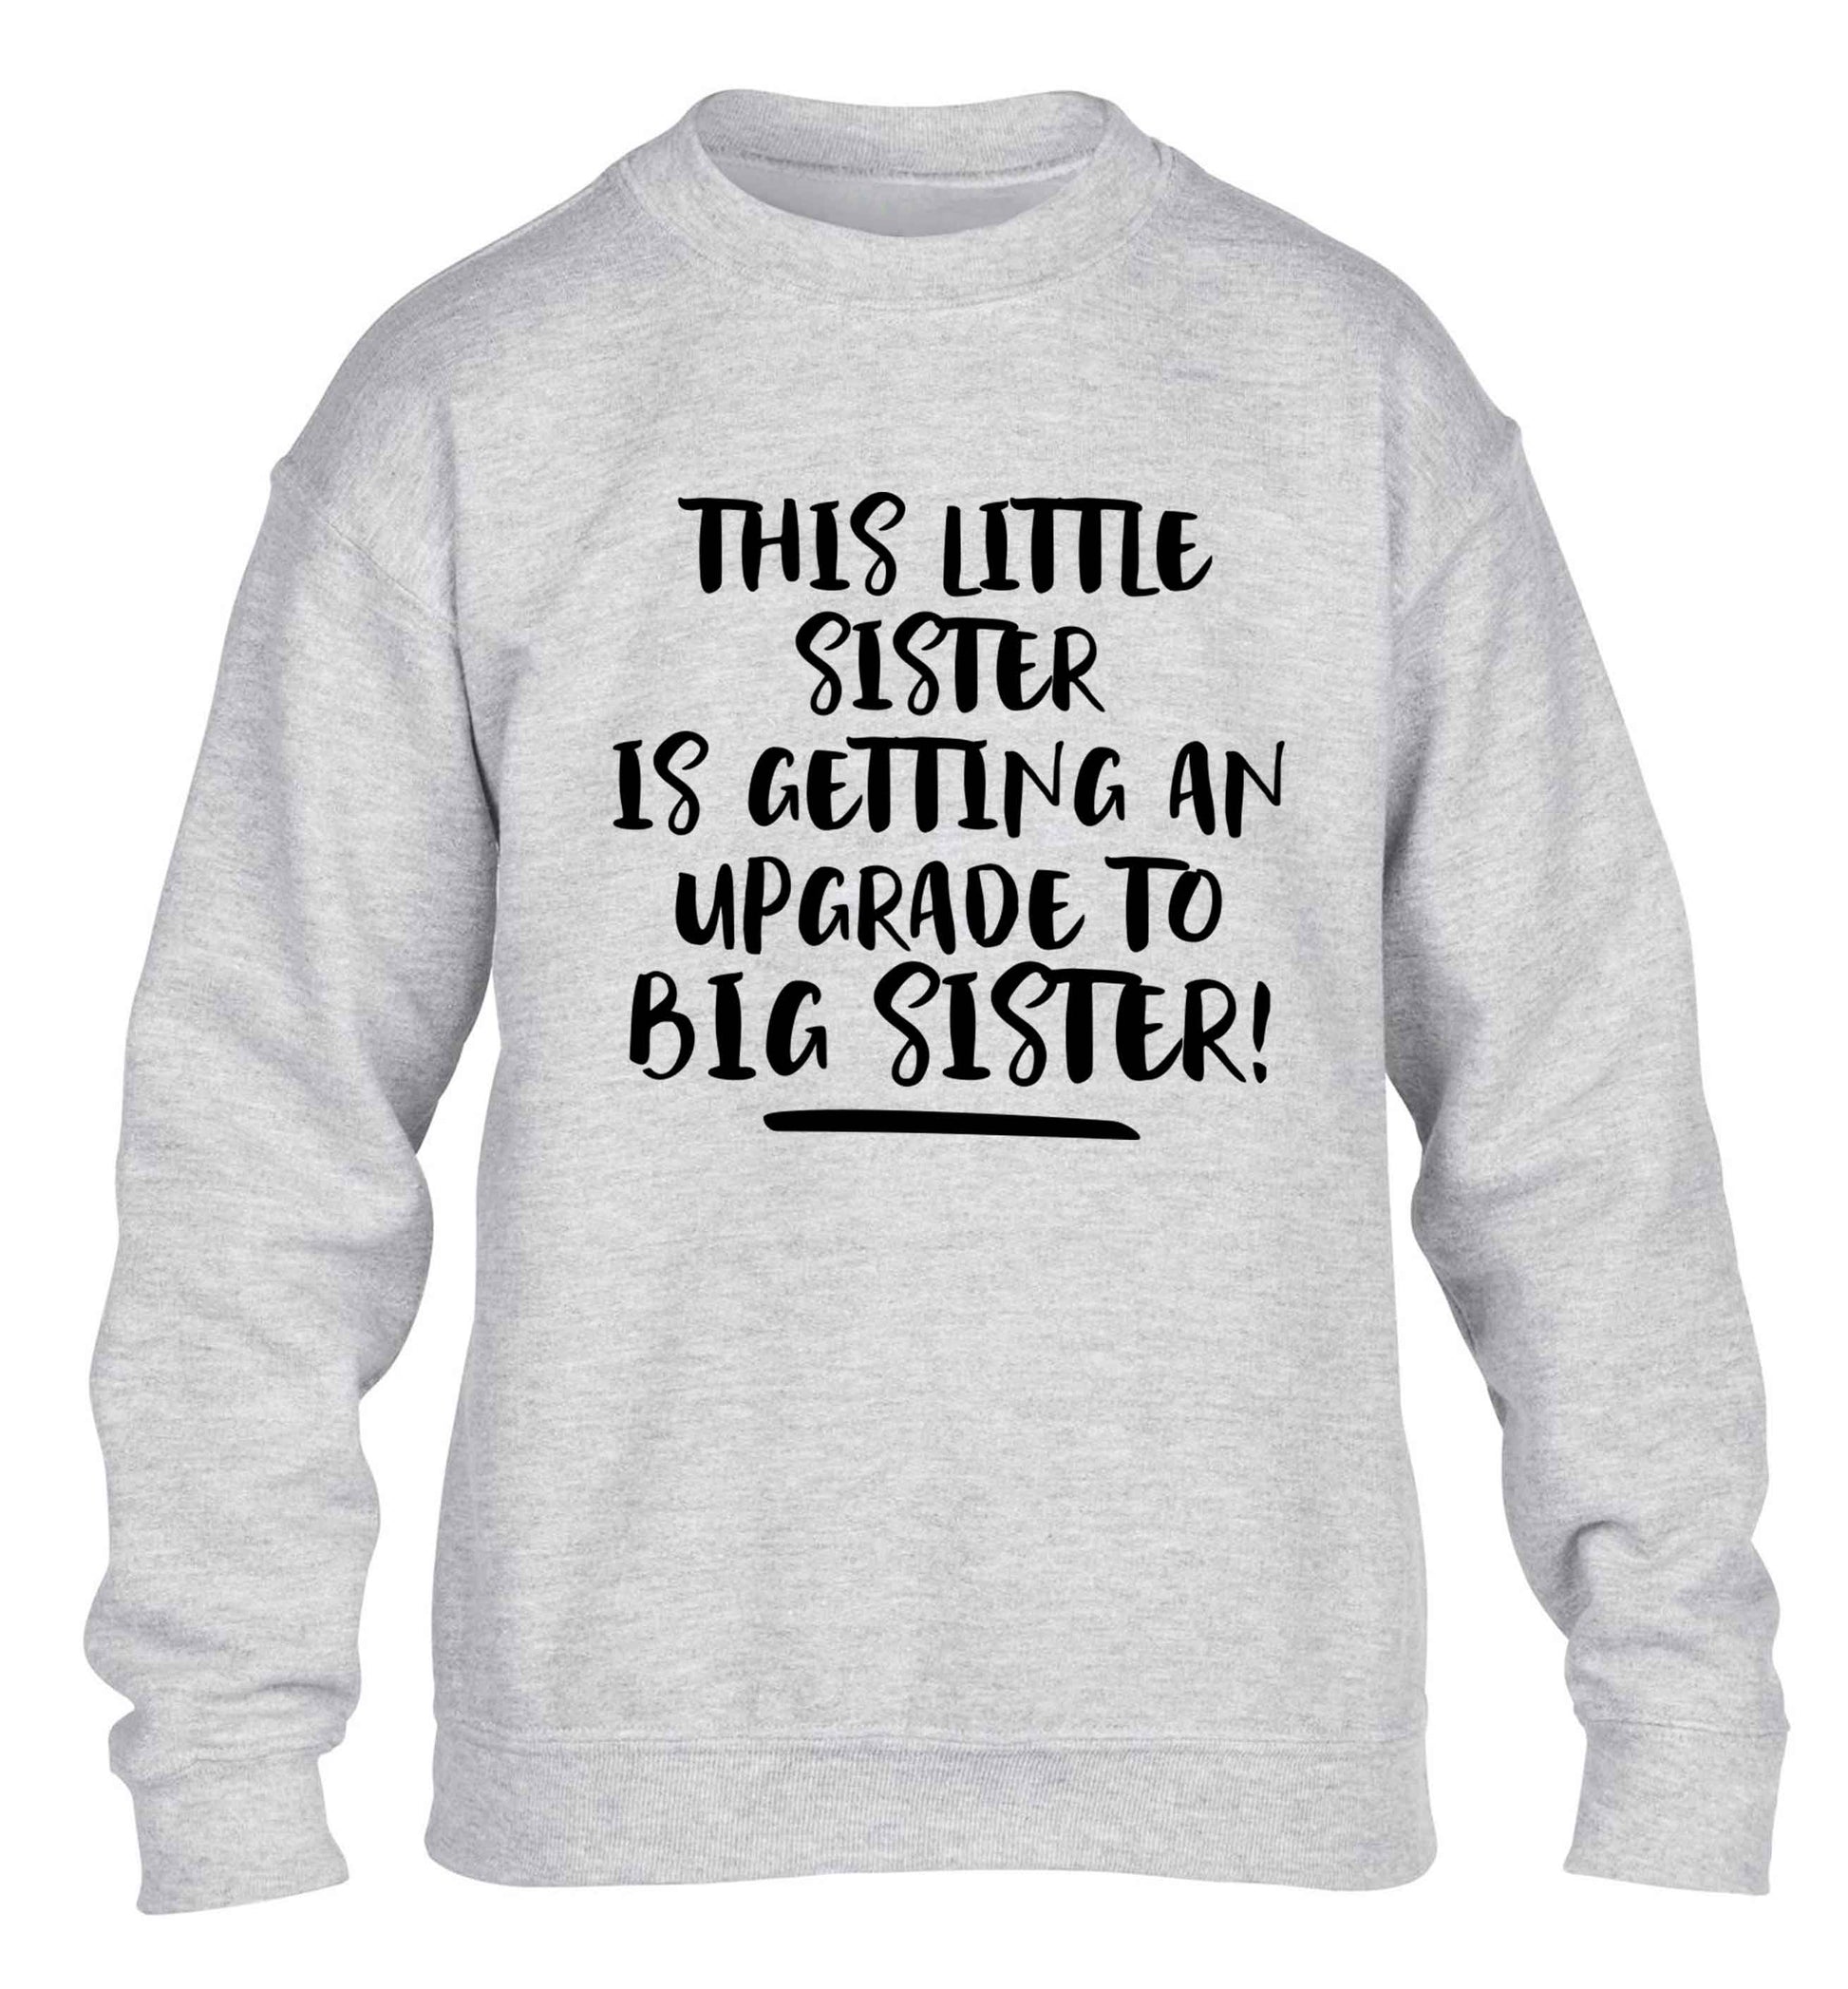 This little sister is getting an upgrade to big sister! children's grey sweater 12-13 Years